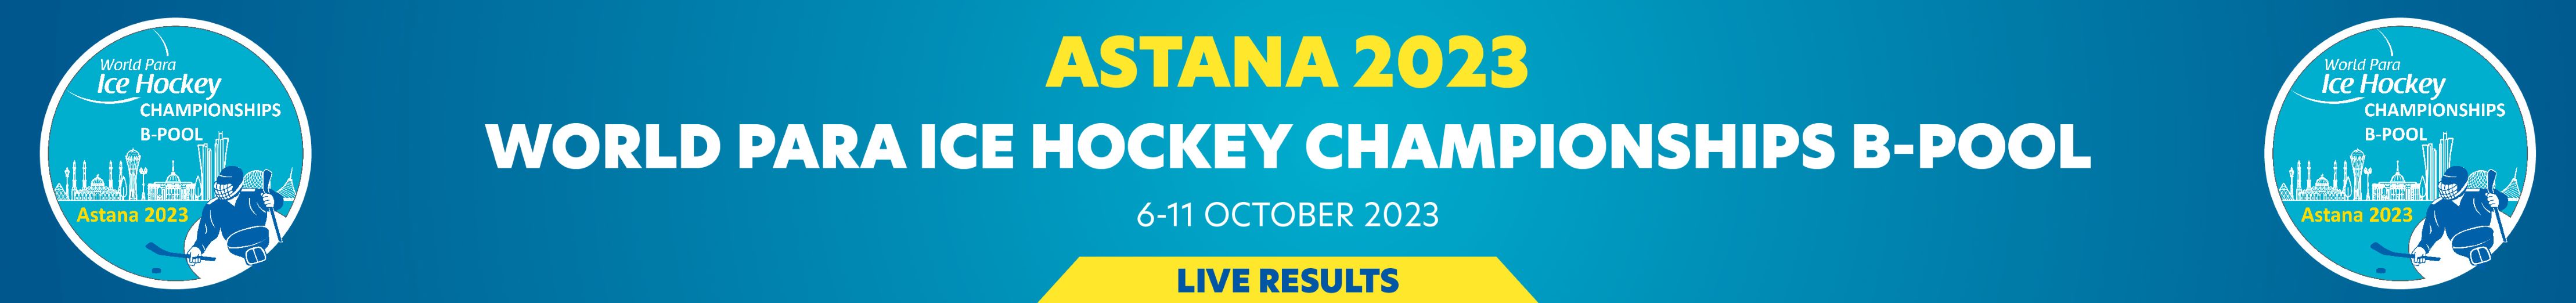 A banner of the Astana 2023 World Para Ice Hockey Championships B-Pool Information Live Results